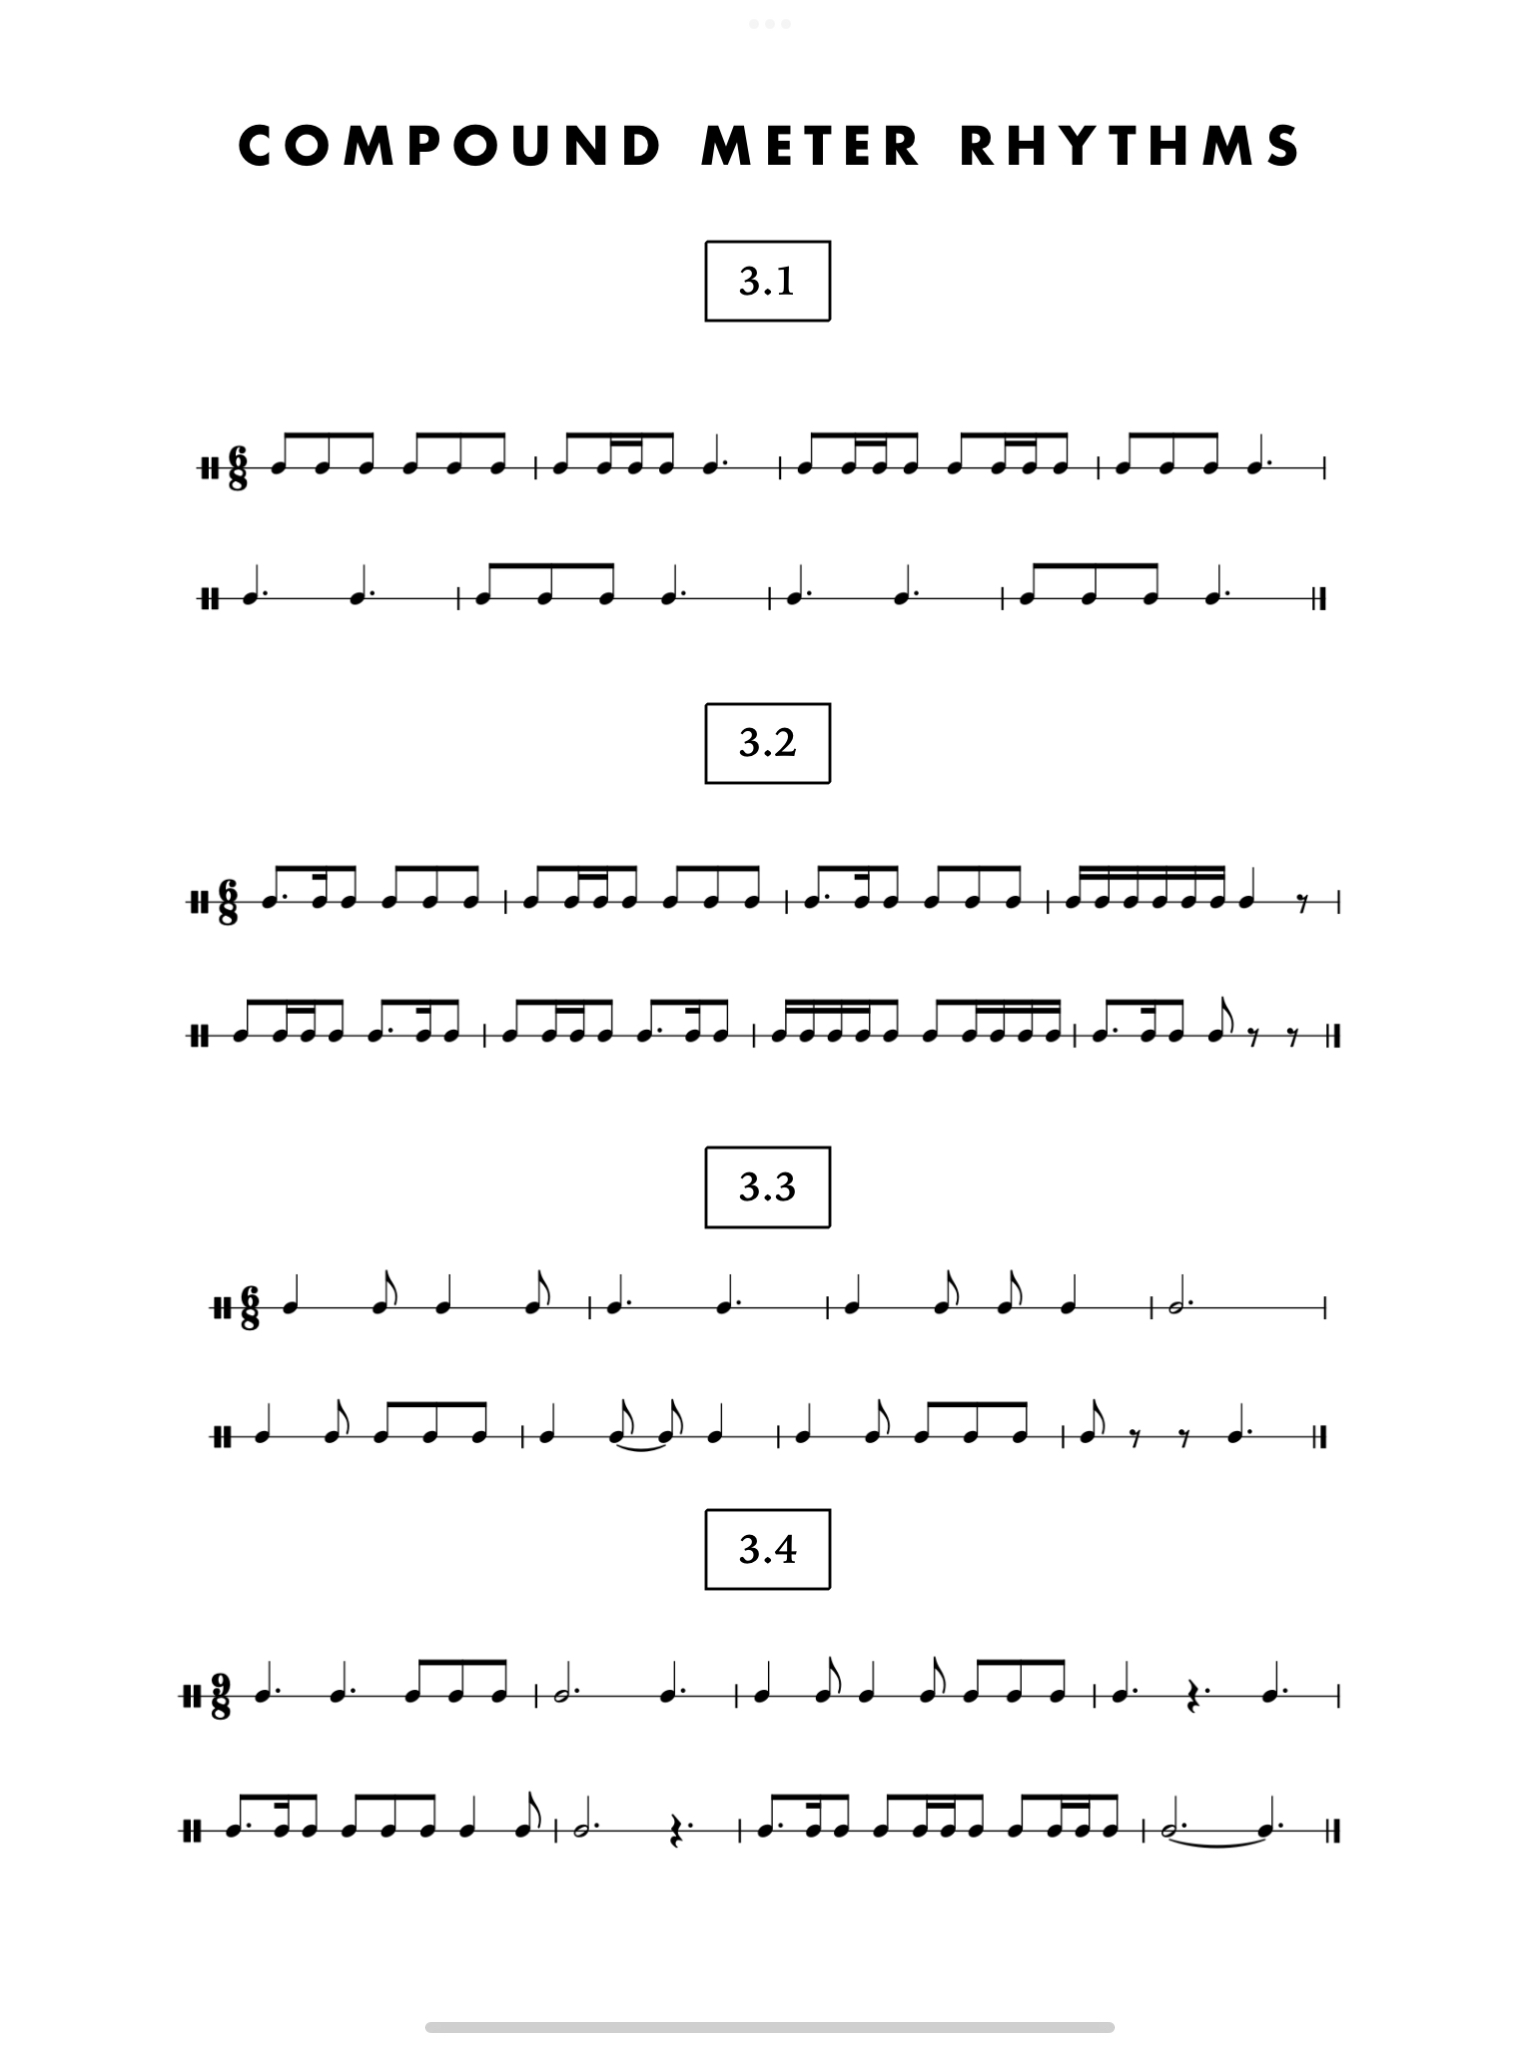 First page of the Compound Meter Rhythms chapter.